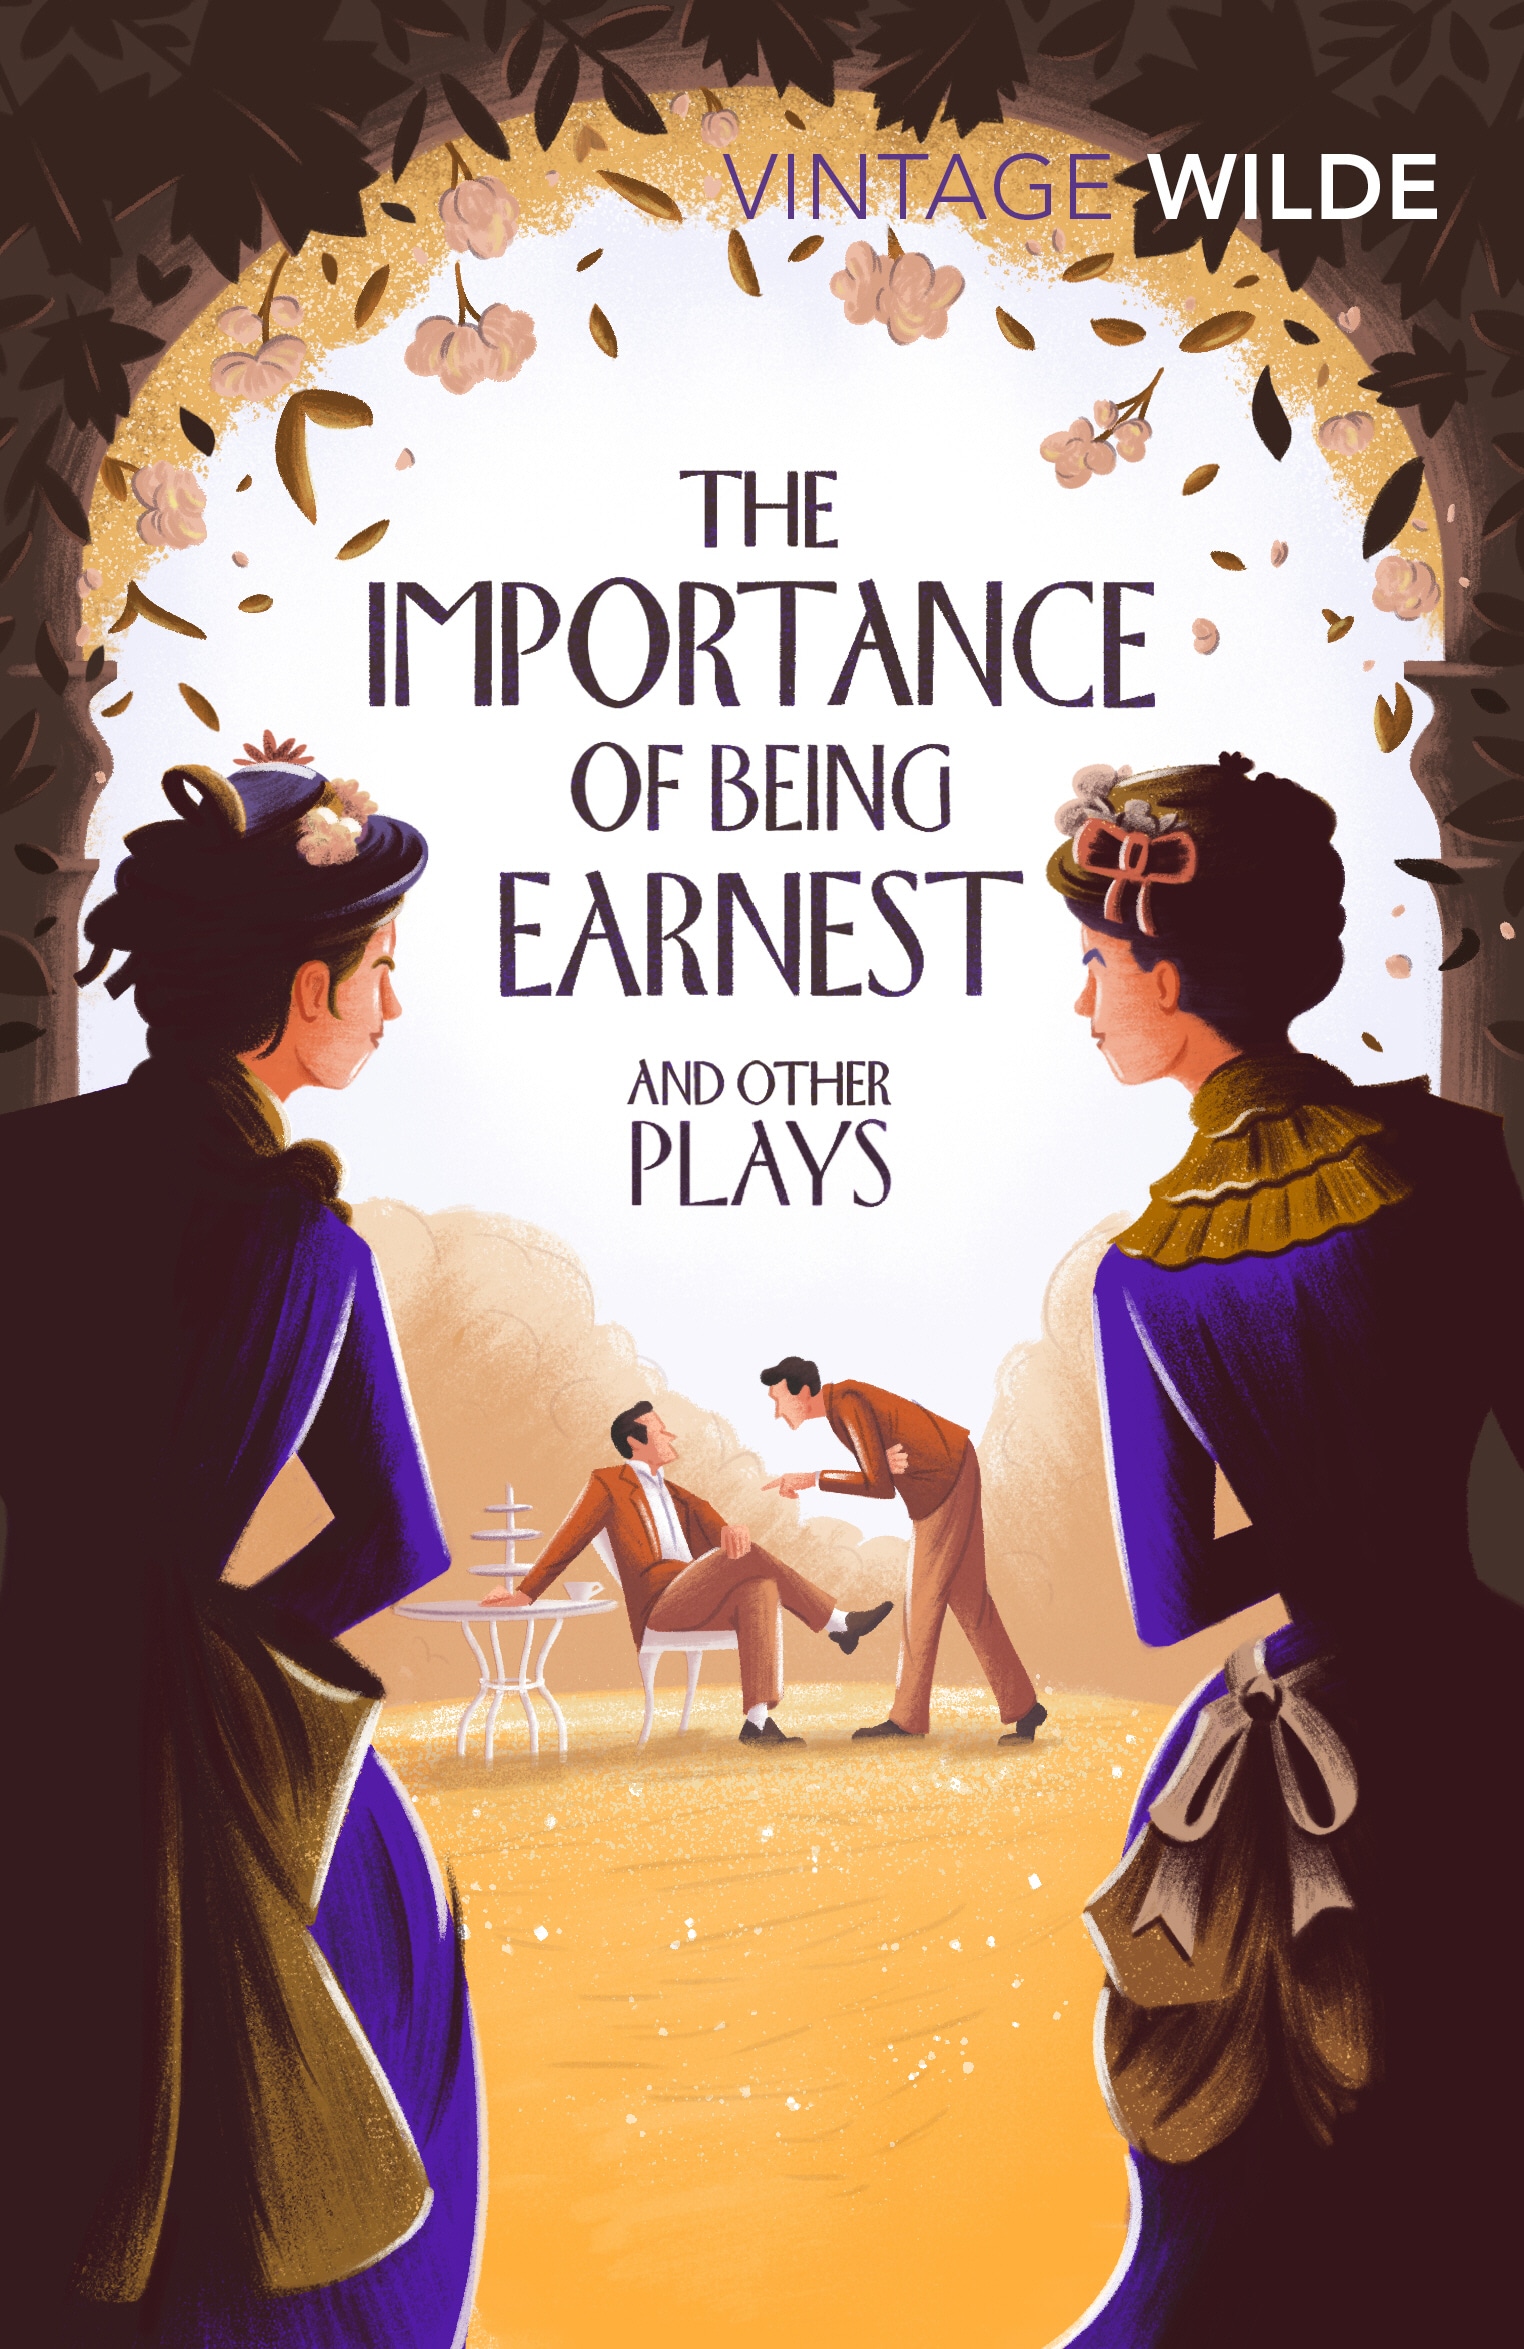 Book “The Importance of Being Earnest and Other Plays” by Oscar Wilde — July 7, 2016